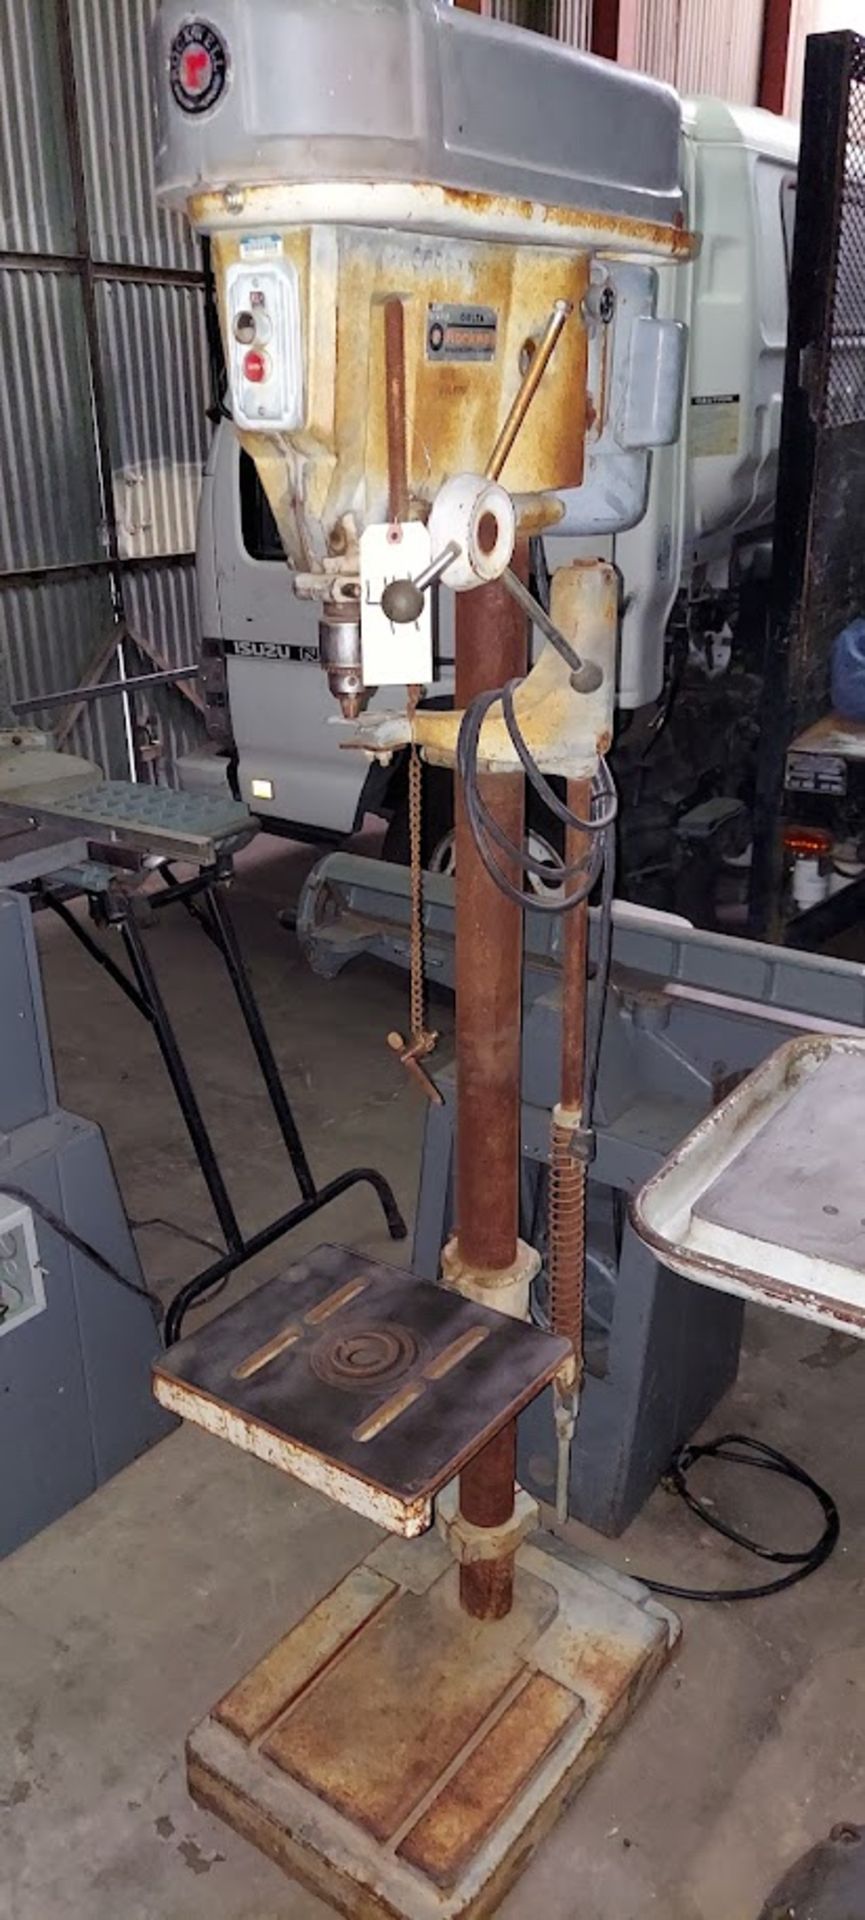 Delta Rockwell 15" Drill Press, Model #15-665, Variable Speed Step Pulley, Motor is 3/4 HP 115/230 - Image 2 of 3